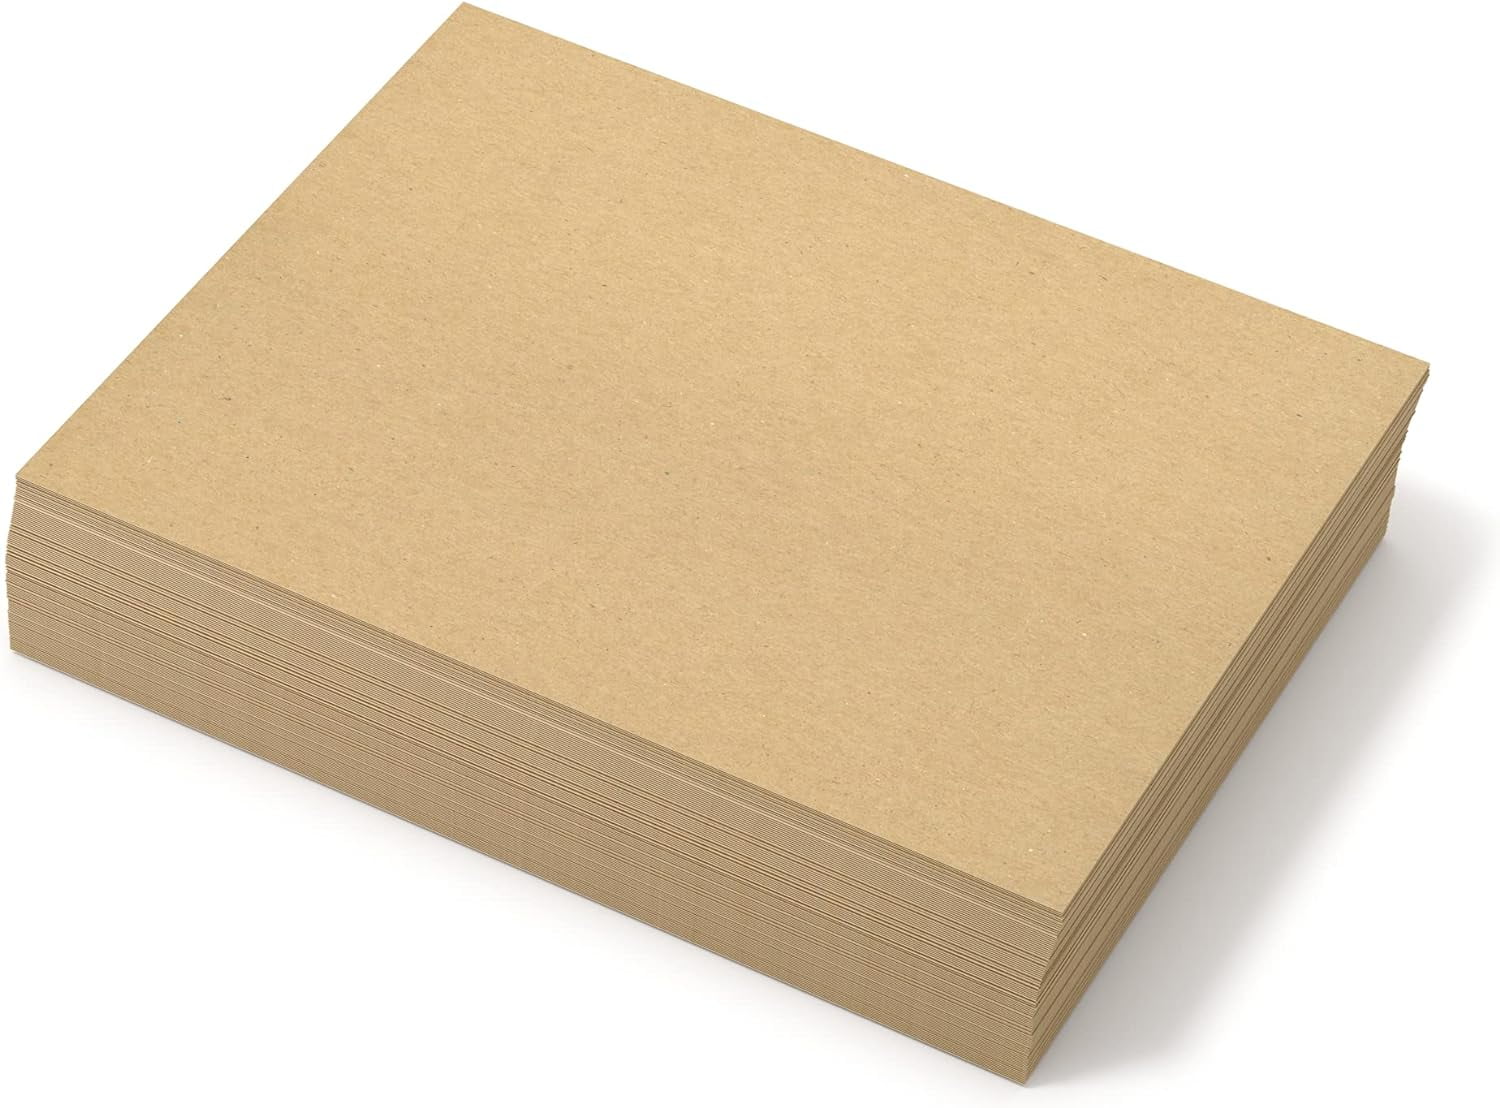 Chipboard Sheets 8.5 x 11 - 100 Sheets of 22 Point Indonesia